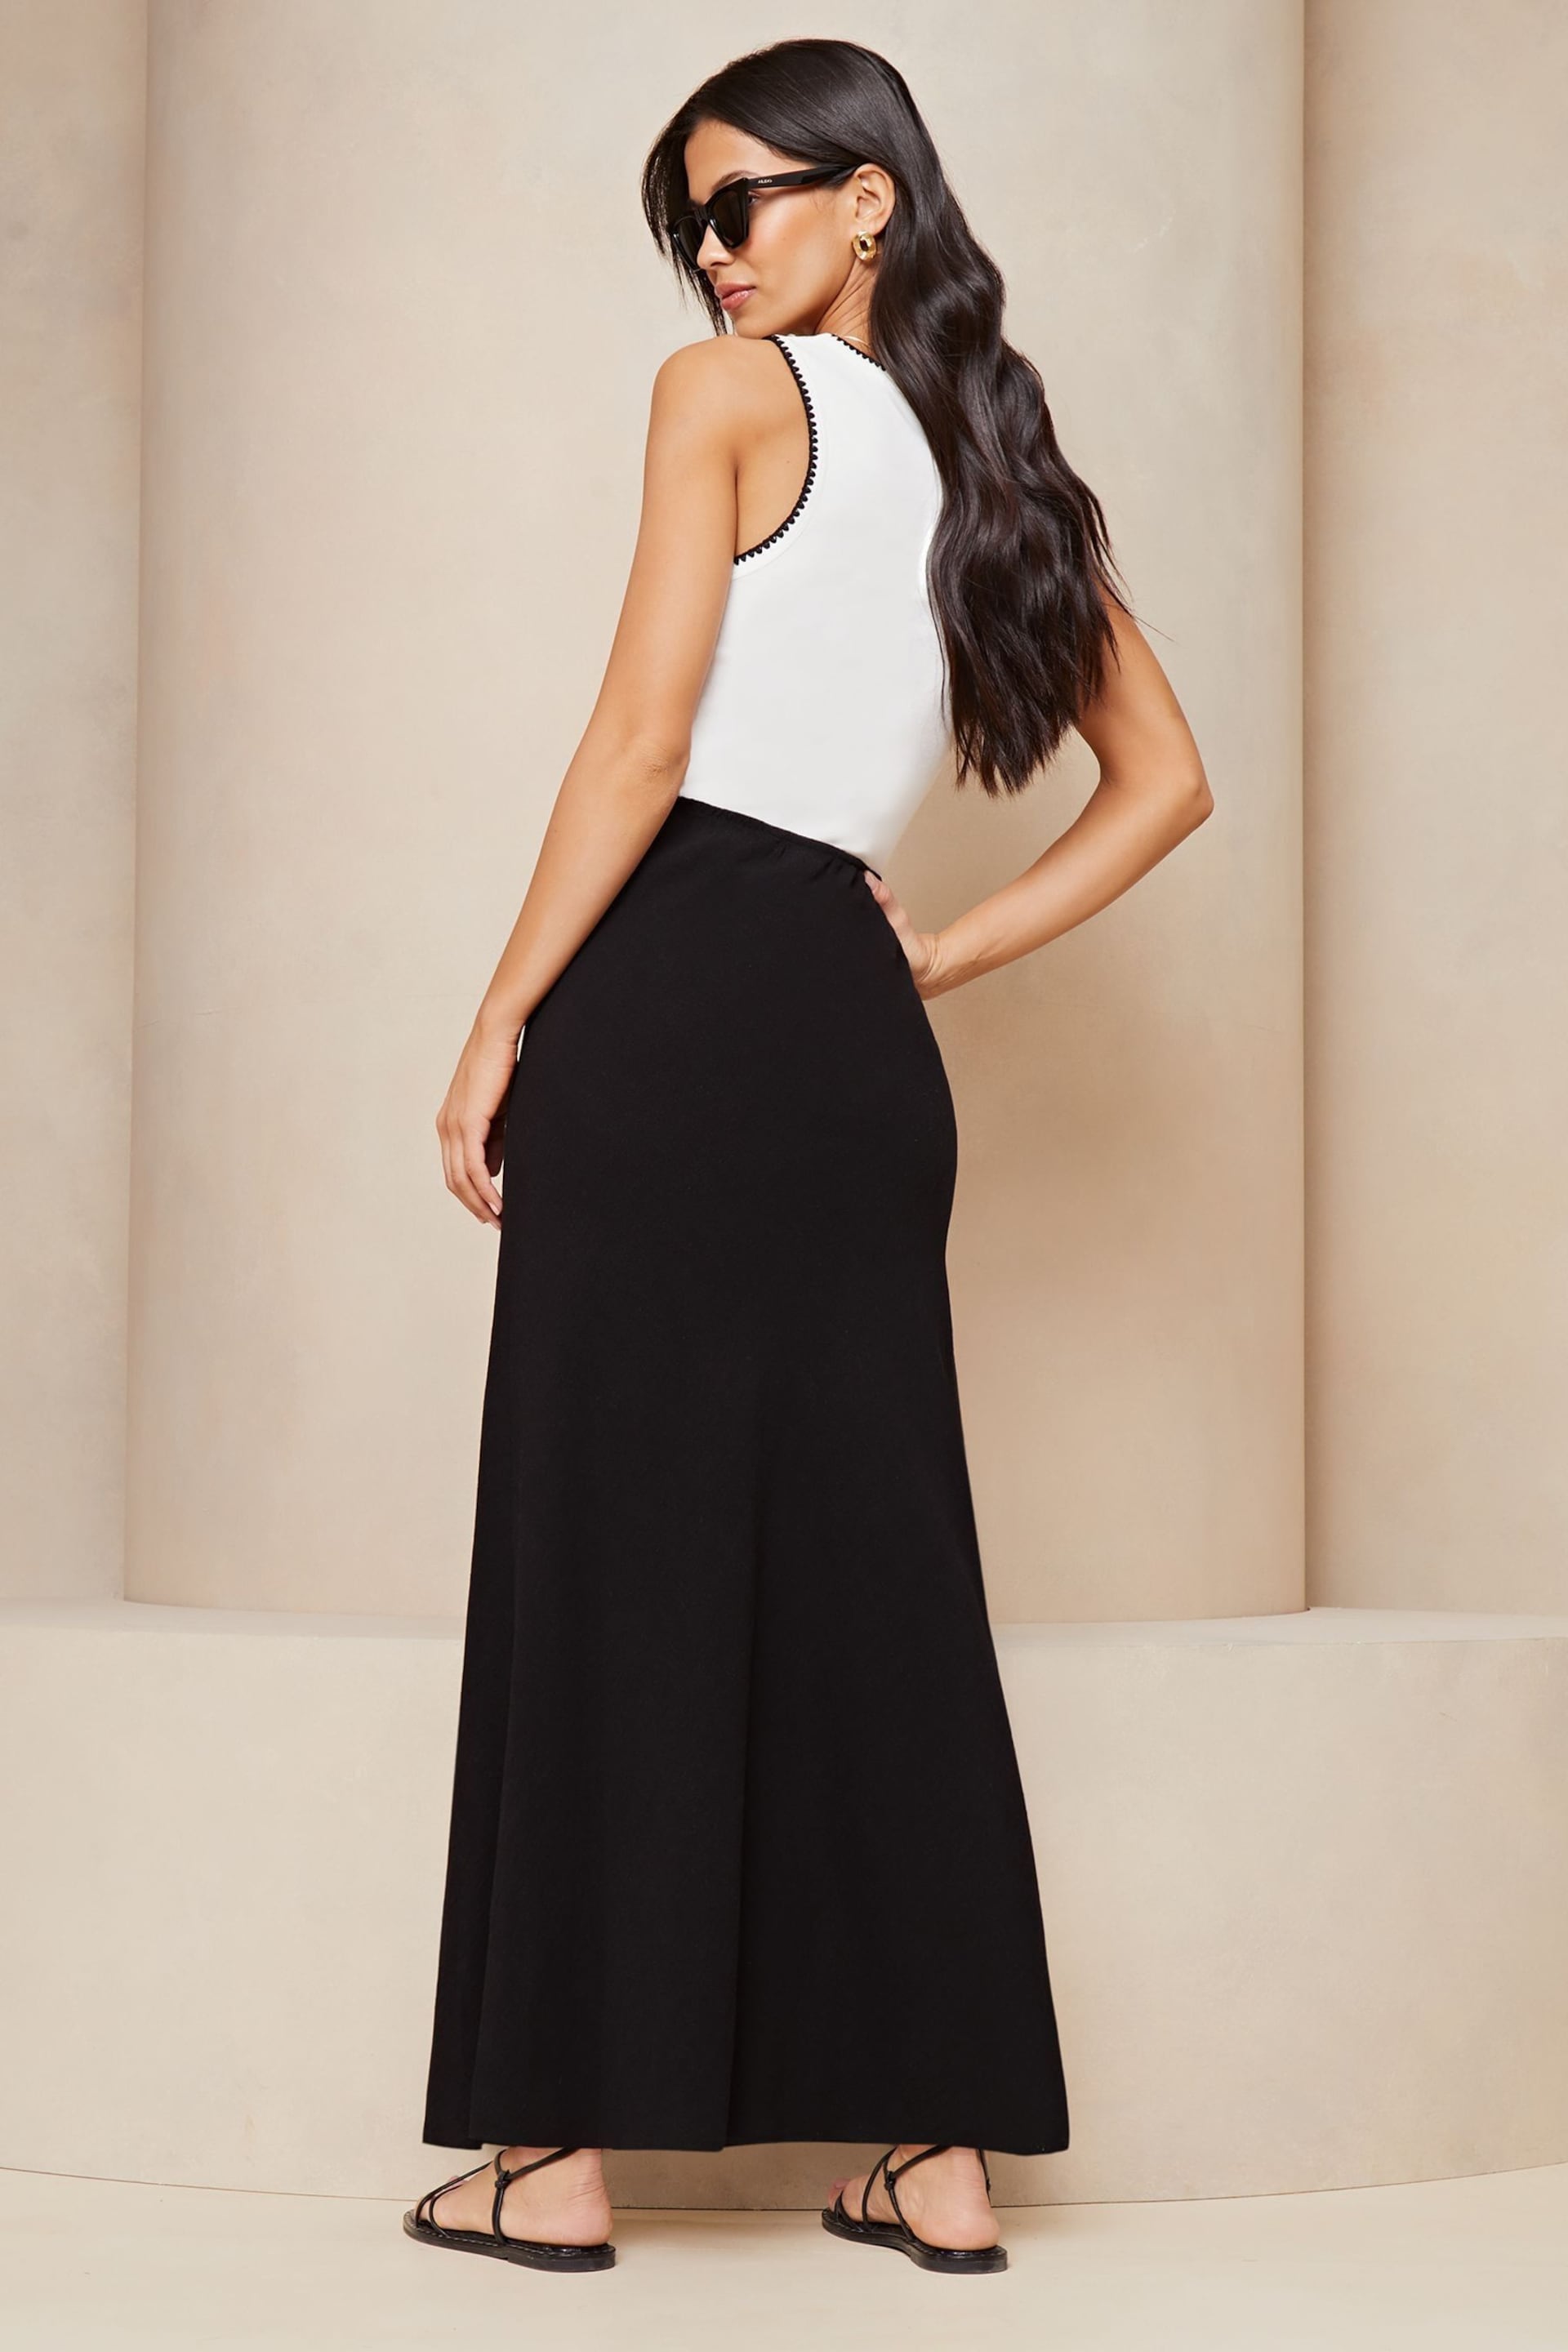 Lipsy Black Maxi Skirt With Touch Of Linen - Image 2 of 4